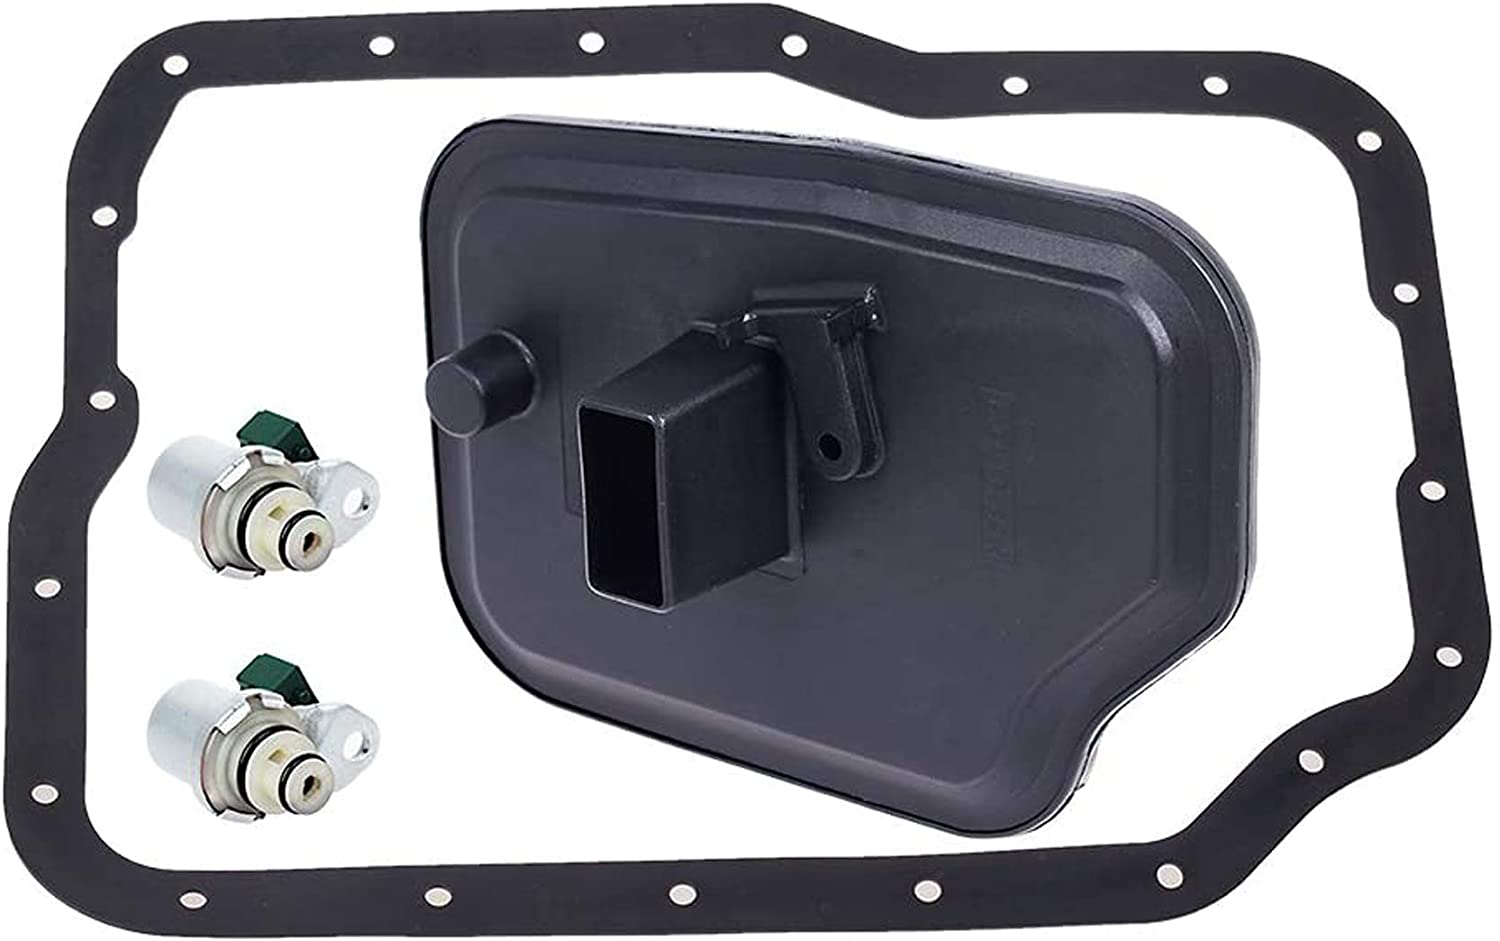 HERCOO 4F27E/FN4A-EL FNR5/FS5A-EL Transmission Solenoid Kit with Long Tube Filter Gasket Compatible with Mazda 2 3 5 6 CX-7, 2006-2009 Ford Fusion, 2006-2009 Mercury Milan 6E5Z-7B155-A / FNC1-21-500A